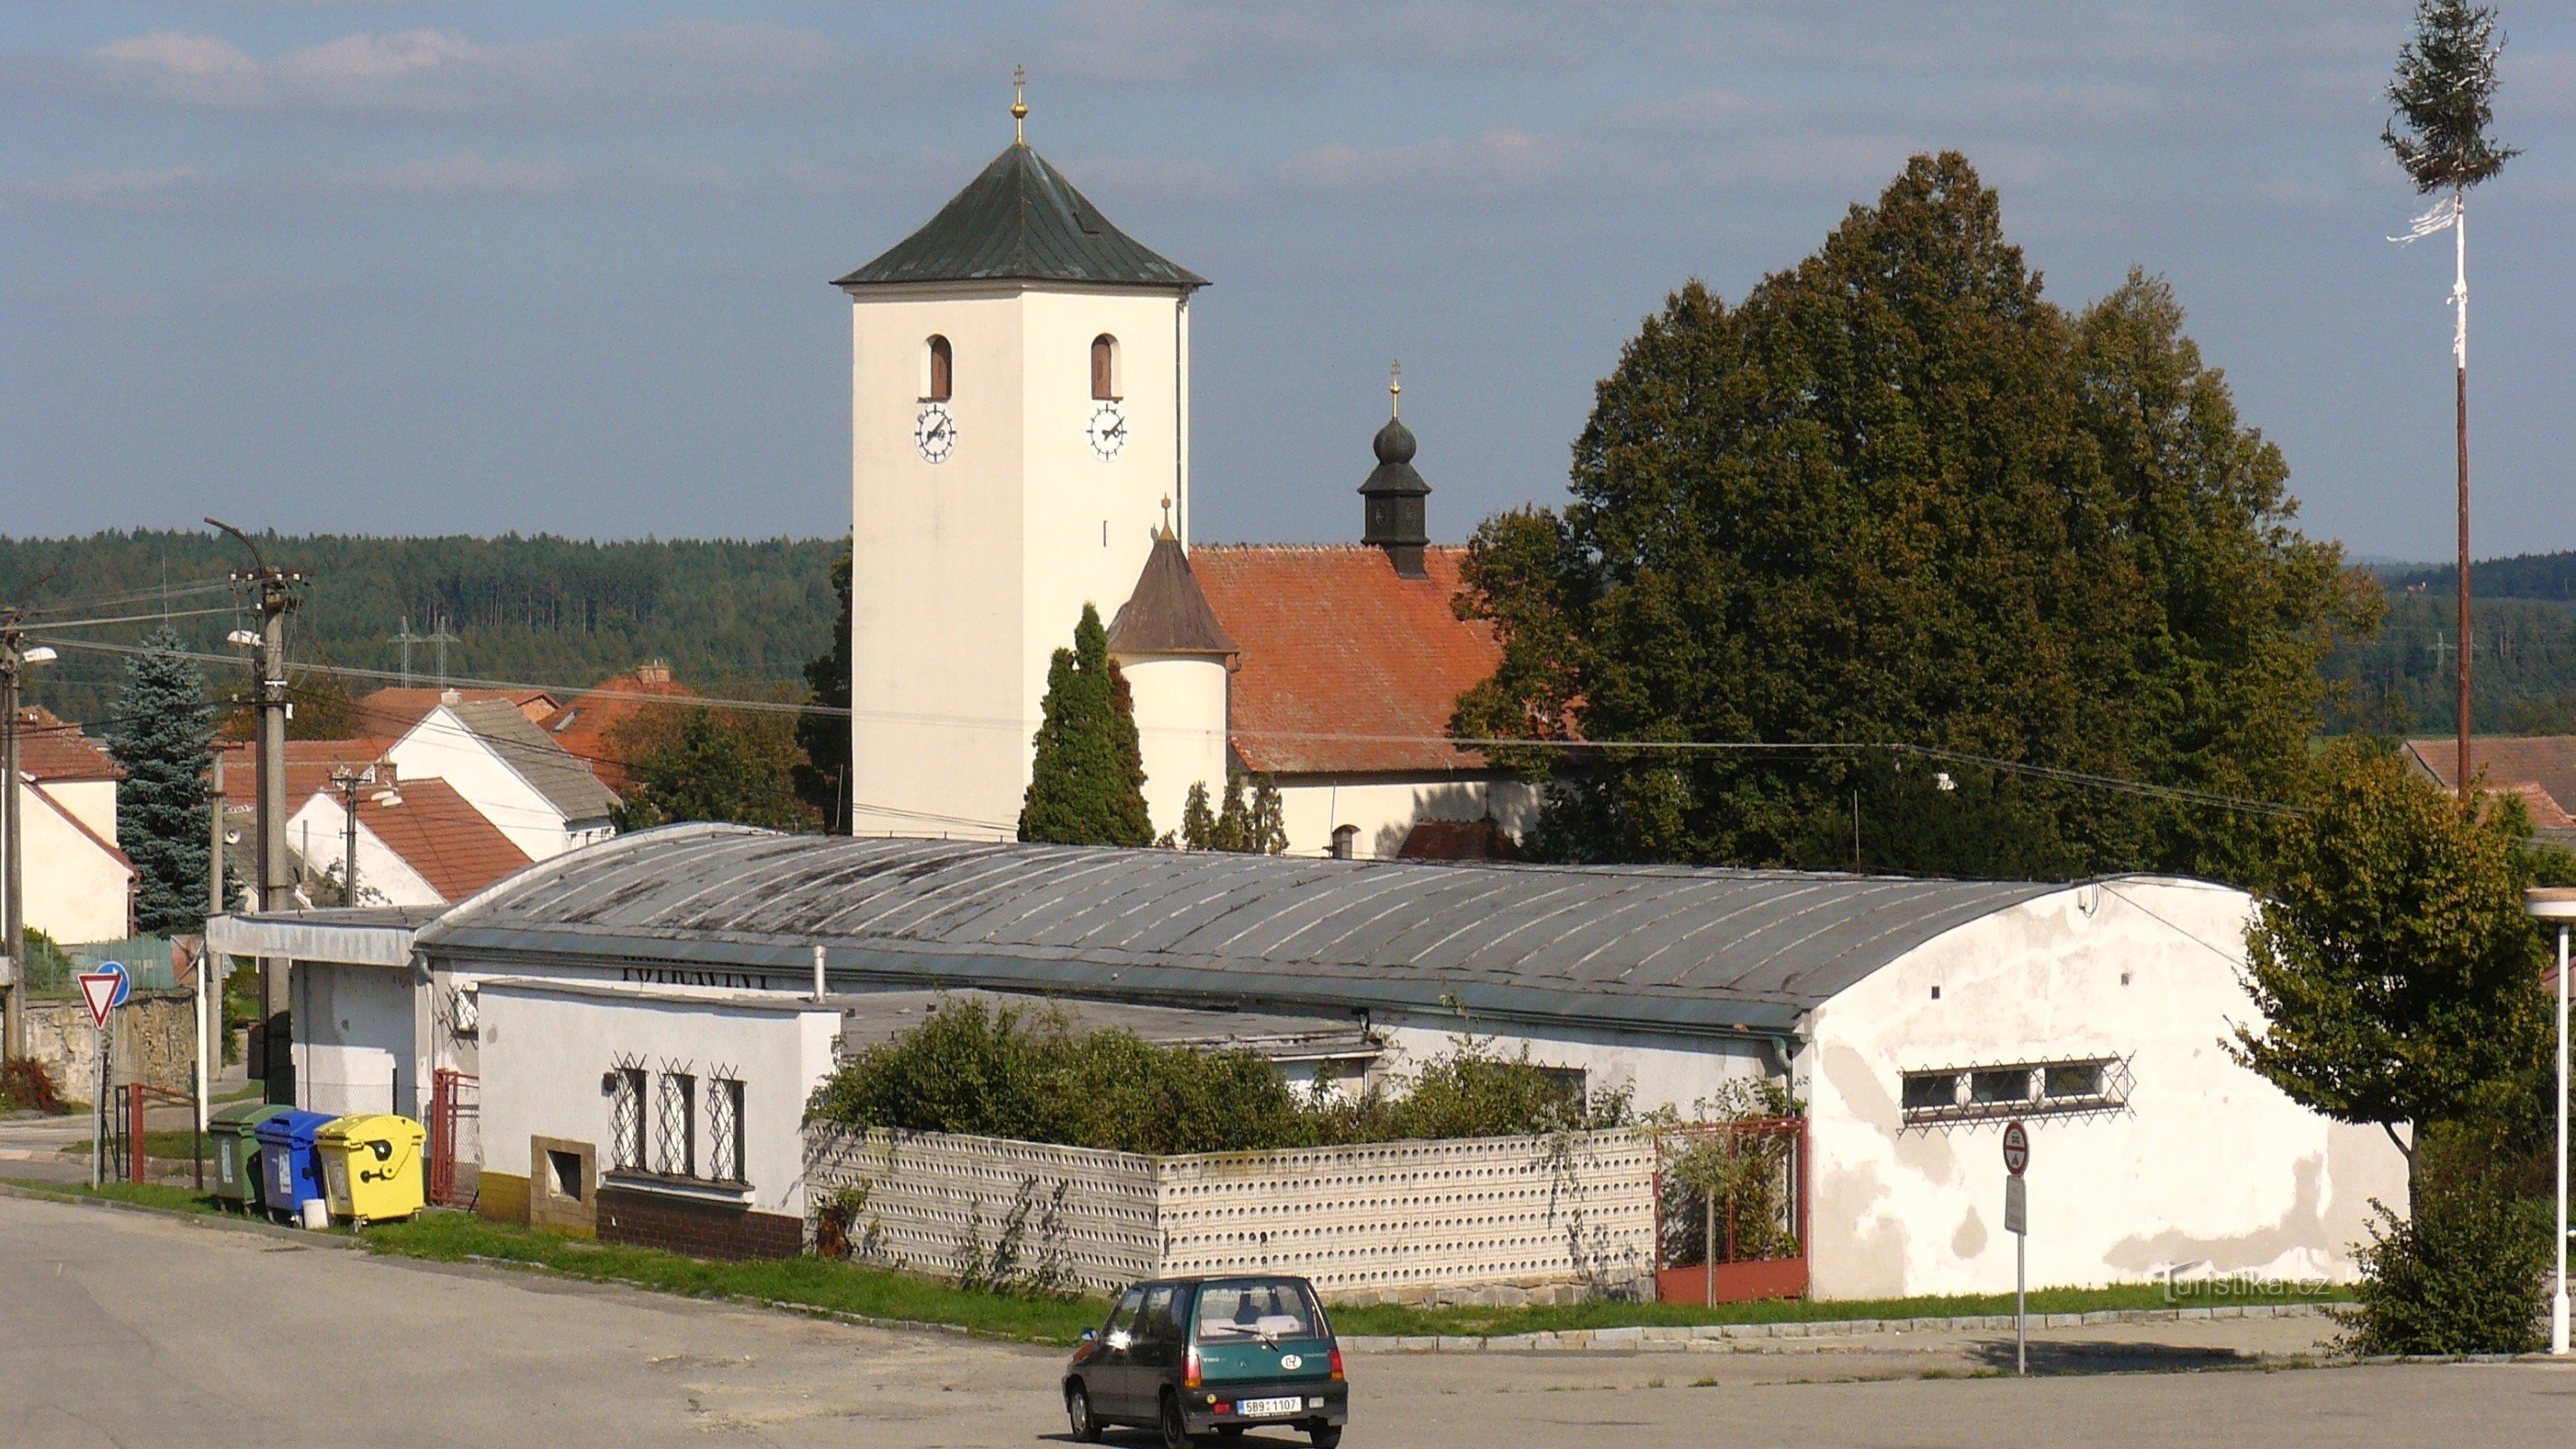 Zbraslav, a church in the Romanesque style